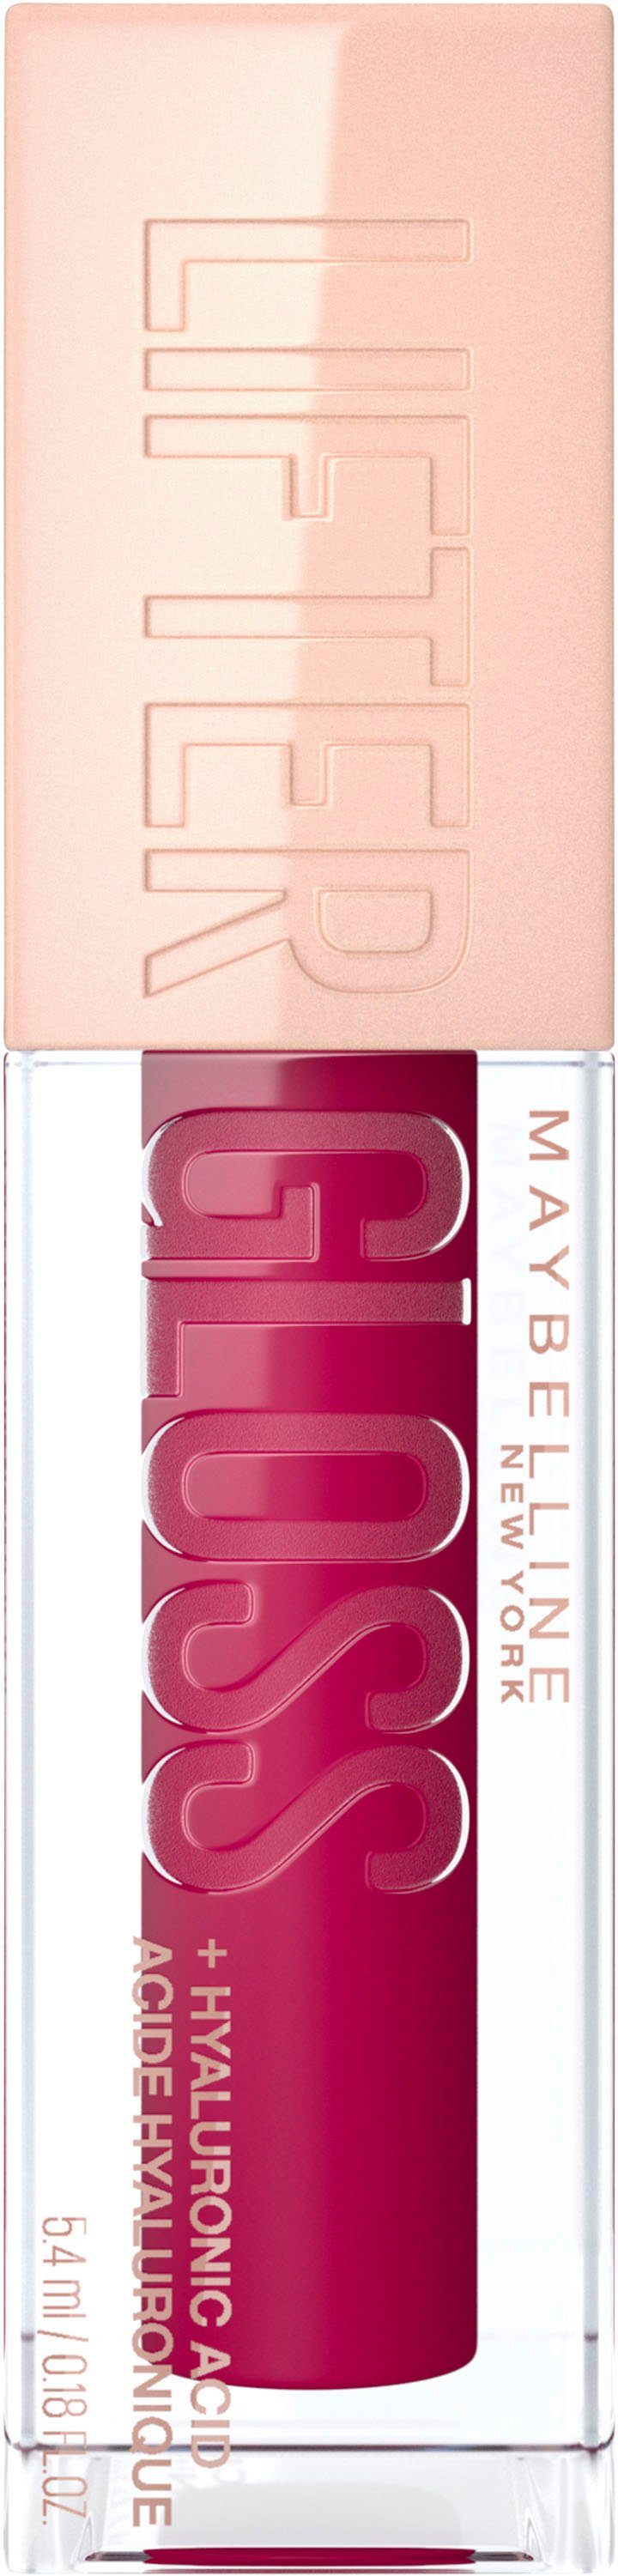 MAYBELLINE NEW YORK Lifter New Gloss Maybelline Lipgloss York